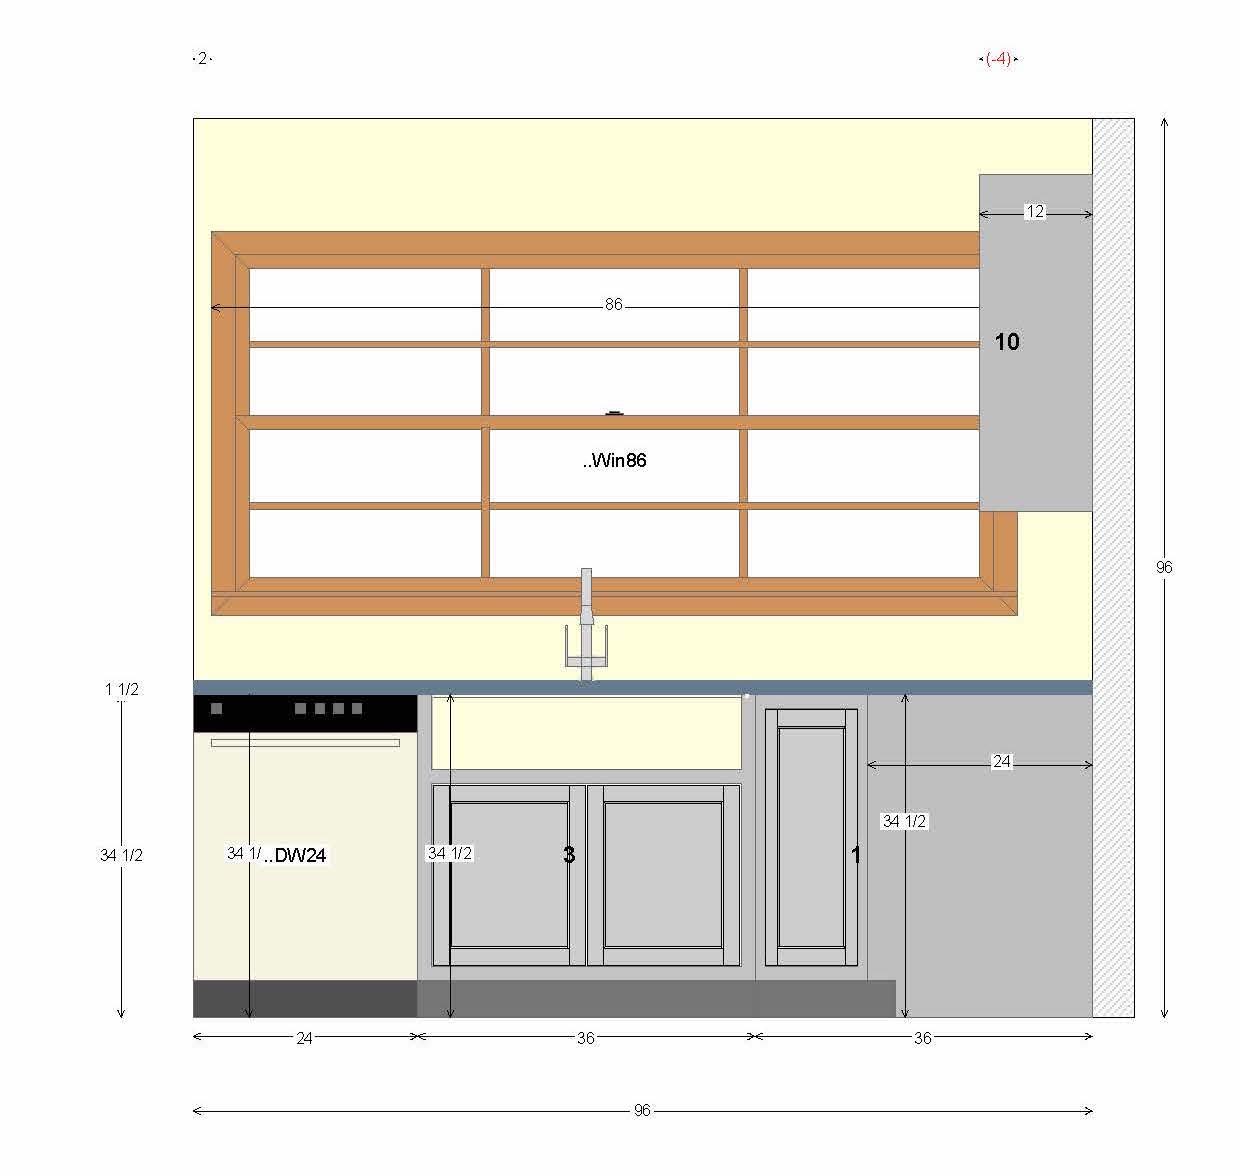 The left wall in an U-shaped kitchen layout design.